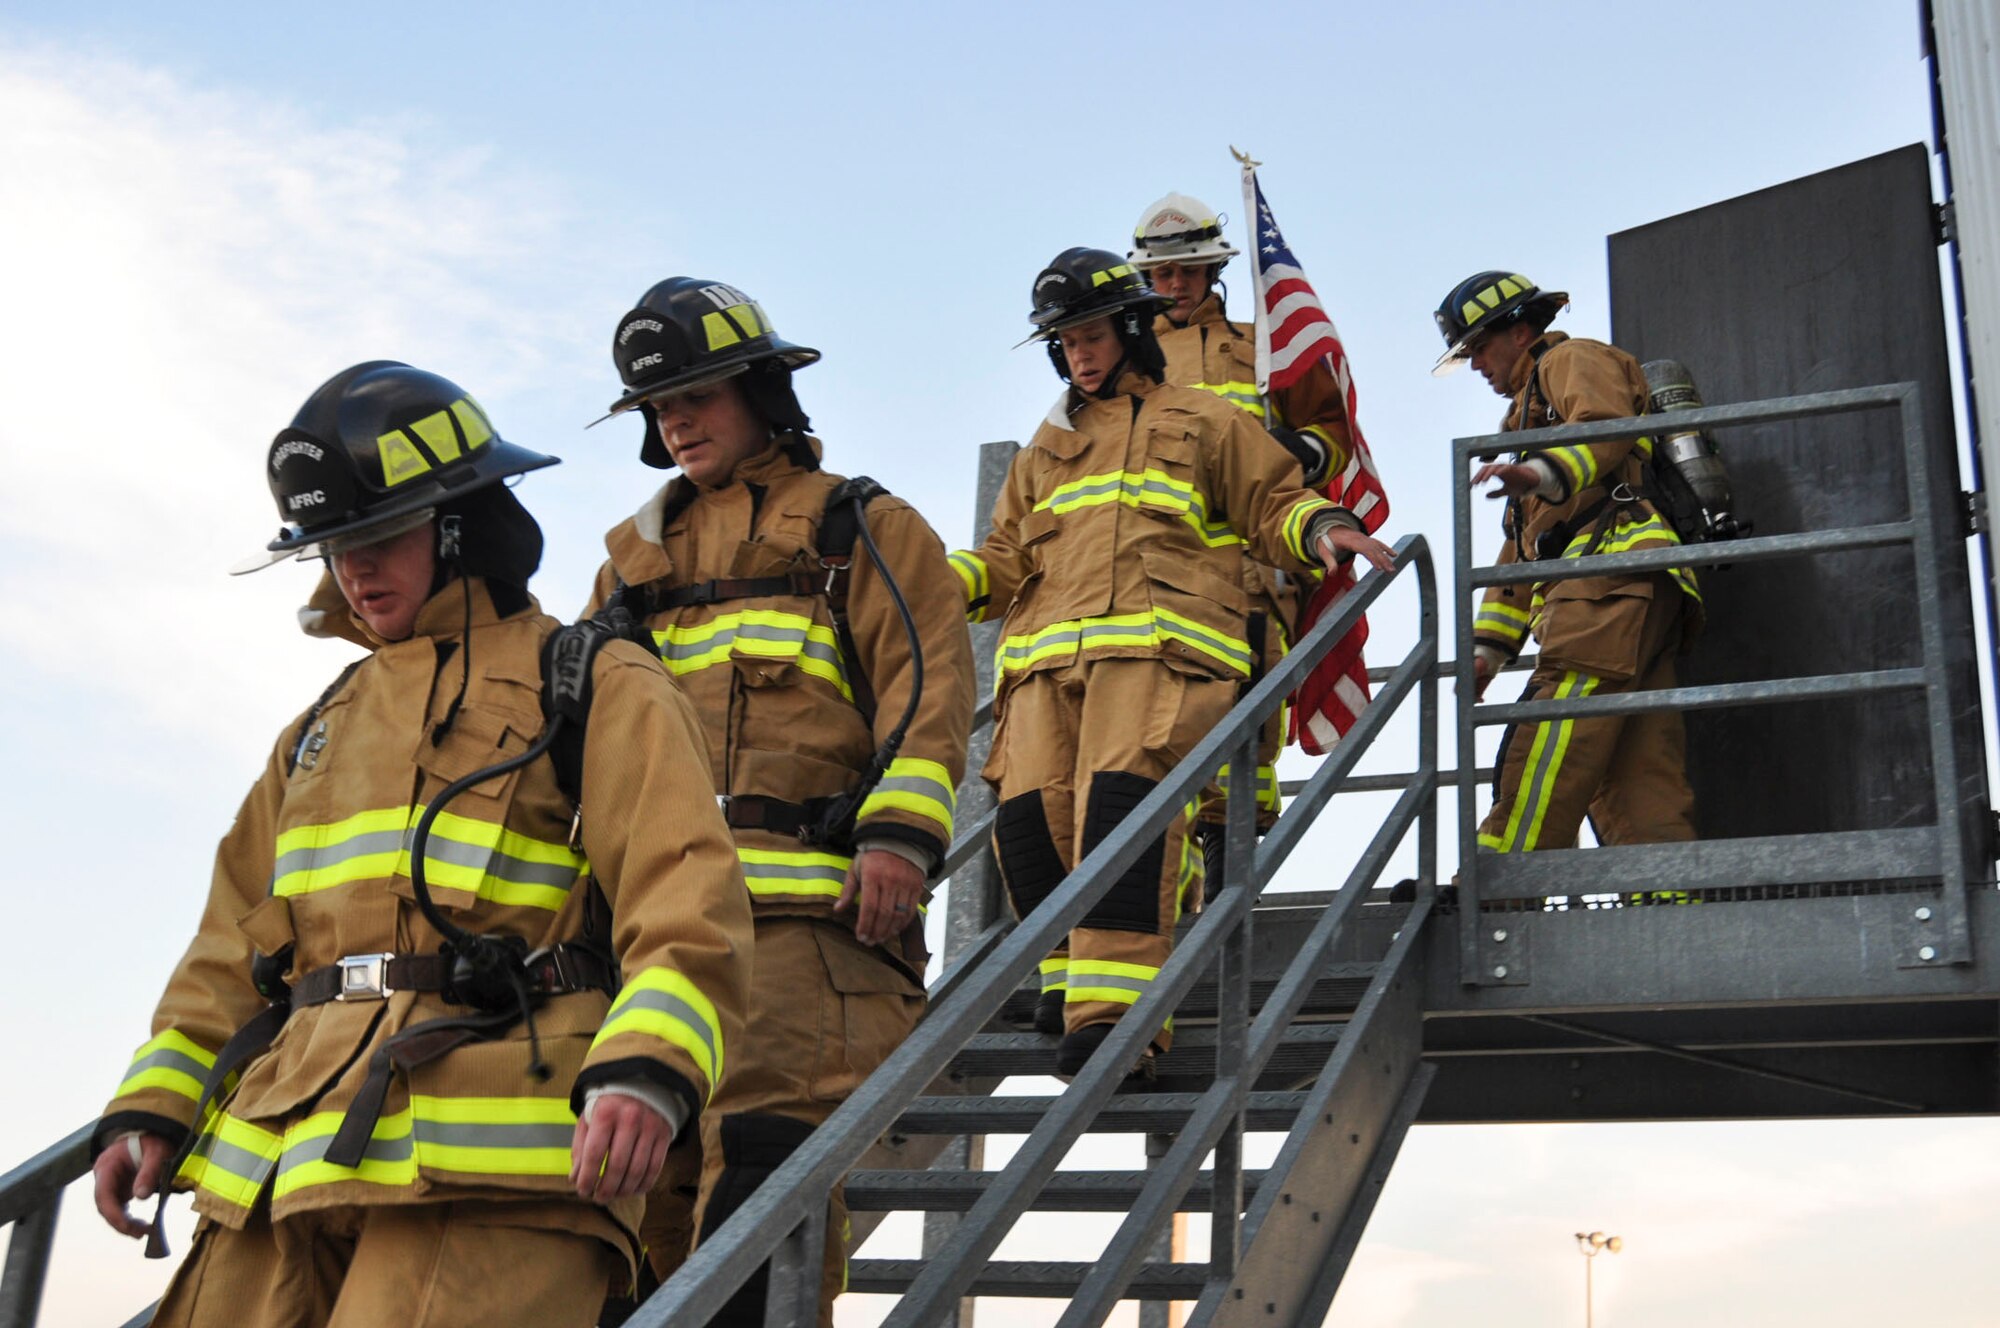 433rd CES firefighters pay tribute to 9/11 firefighters